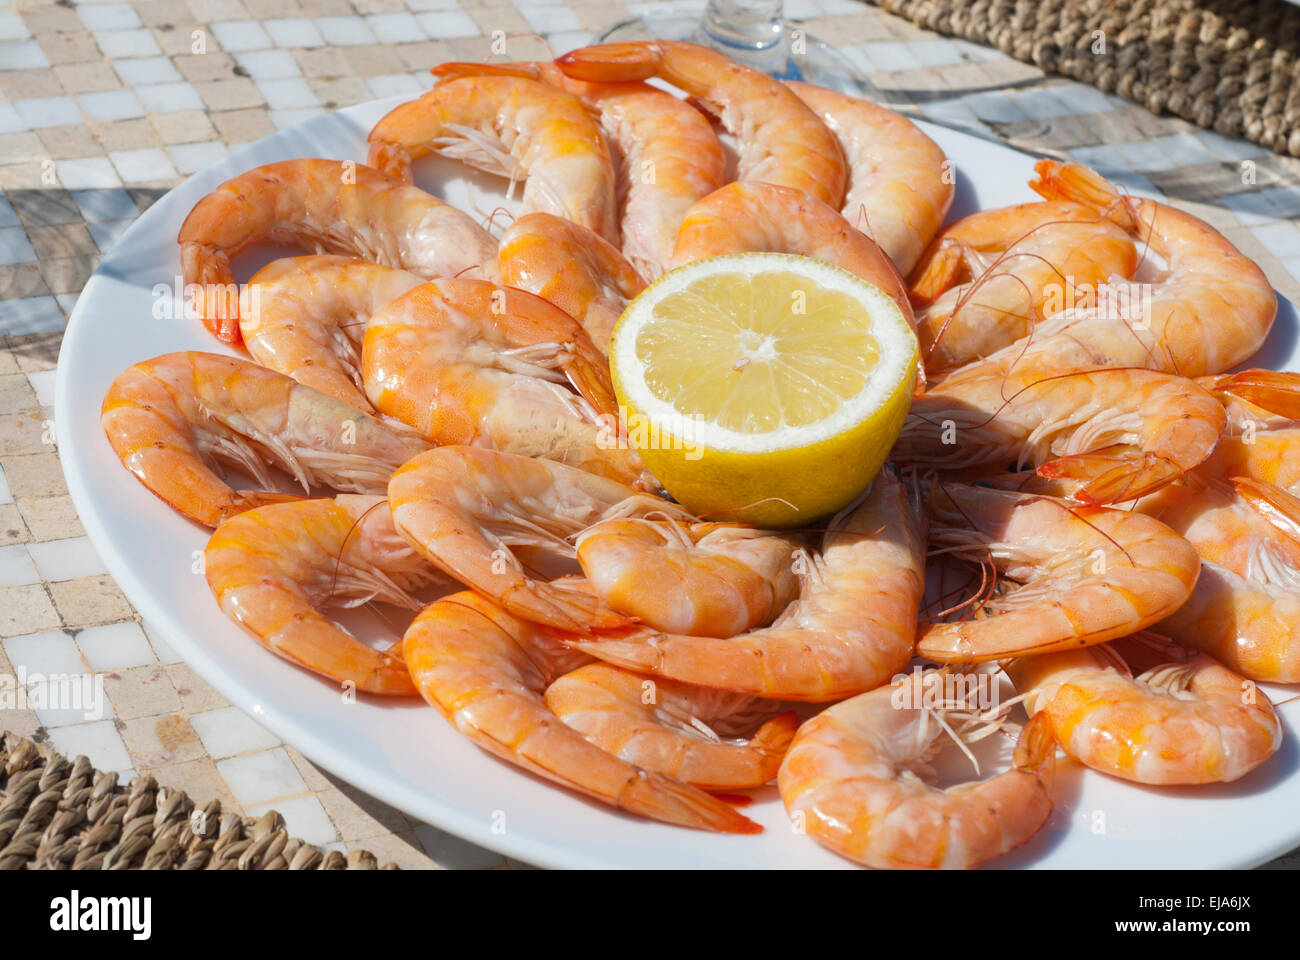 Plate of Prawns with Lemon juice on a round plate in the sunshine Stock Photo